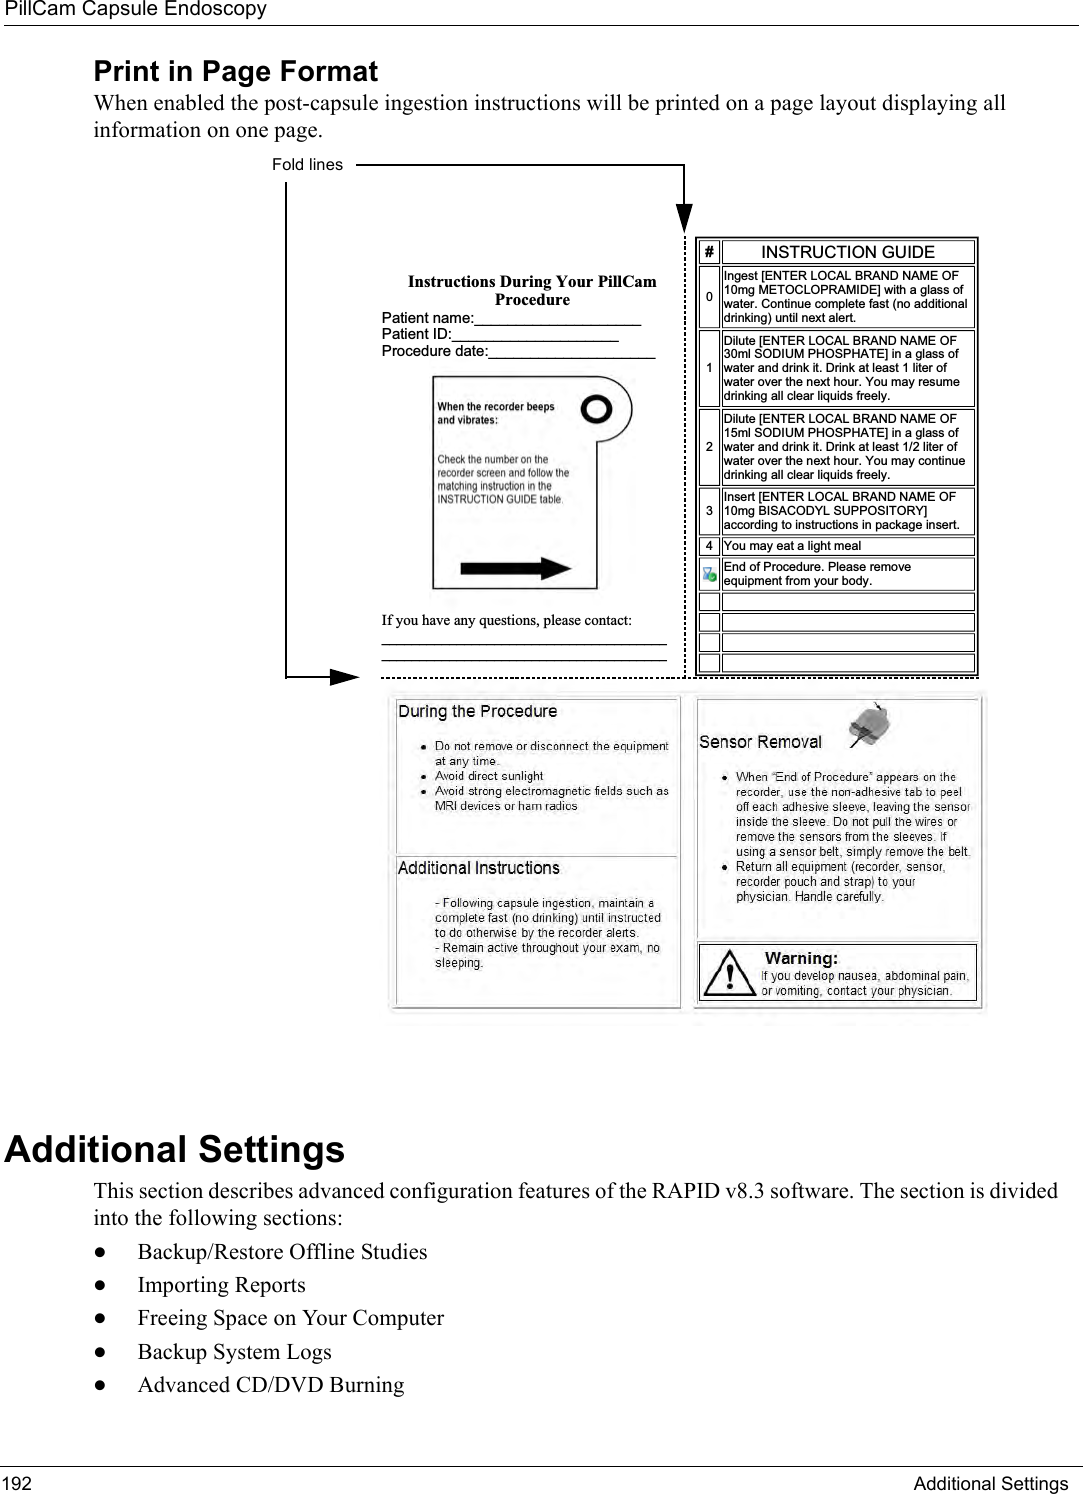 PillCam Capsule Endoscopy192 Additional SettingsPrint in Page FormatWhen enabled the post-capsule ingestion instructions will be printed on a page layout displaying all information on one page. Additional SettingsThis section describes advanced configuration features of the RAPID v8.3 software. The section is divided into the following sections:•Backup/Restore Offline Studies•Importing Reports•Freeing Space on Your Computer•Backup System Logs•Advanced CD/DVD Burning,QVWUXFWLRQV&apos;XULQJ&lt;RXU3LOO&amp;DP3URFHGXUH3DWLHQWQDPHBBBBBBBBBBBBBBBBBBBB3DWLHQW,&apos;BBBBBBBBBBBBBBBBBBBB3URFHGXUHGDWHBBBBBBBBBBBBBBBBBBBBBBBBBBBBBBBBBBBBBBBBBBBBBBBBBBBBBBBBBBBBBBBBBBBBBBBBBBBBBBBBBBBBBBBBBBBBBBBB,16758&amp;7,21*8,&apos;(,QJHVW&gt;(17(5/2&amp;$/%5$1&apos;1$0(2)PJ0(72&amp;/235$0,&apos;(@ZLWKDJODVVRIZDWHU&amp;RQWLQXHFRPSOHWHIDVWQRDGGLWLRQDOGULQNLQJXQWLOQH[WDOHUW&apos;LOXWH&gt;(17(5/2&amp;$/%5$1&apos;1$0(2)PO62&apos;,803+263+$7(@LQDJODVVRIZDWHUDQGGULQNLW&apos;ULQNDWOHDVWOLWHURIZDWHURYHUWKHQH[WKRXU&lt;RXPD\UHVXPHGULQNLQJDOOFOHDUOLTXLGVIUHHO\&apos;LOXWH&gt;(17(5/2&amp;$/%5$1&apos;1$0(2)PO62&apos;,803+263+$7(@LQDJODVVRIZDWHUDQGGULQNLW&apos;ULQNDWOHDVWOLWHURIZDWHURYHUWKHQH[WKRXU&lt;RXPD\FRQWLQXHGULQNLQJDOOFOHDUOLTXLGVIUHHO\,QVHUW&gt;(17(5/2&amp;$/%5$1&apos;1$0(2)PJ%,6$&amp;2&apos;&lt;/683326,725&lt;@DFFRUGLQJWRLQVWUXFWLRQVLQSDFNDJHLQVHUW &lt;RXPD\HDWDOLJKWPHDO(QGRI3URFHGXUH3OHDVHUHPRYHHTXLSPHQWIURP\RXUERG\    $&quot;#&quot;&apos;() %((((Fold lines